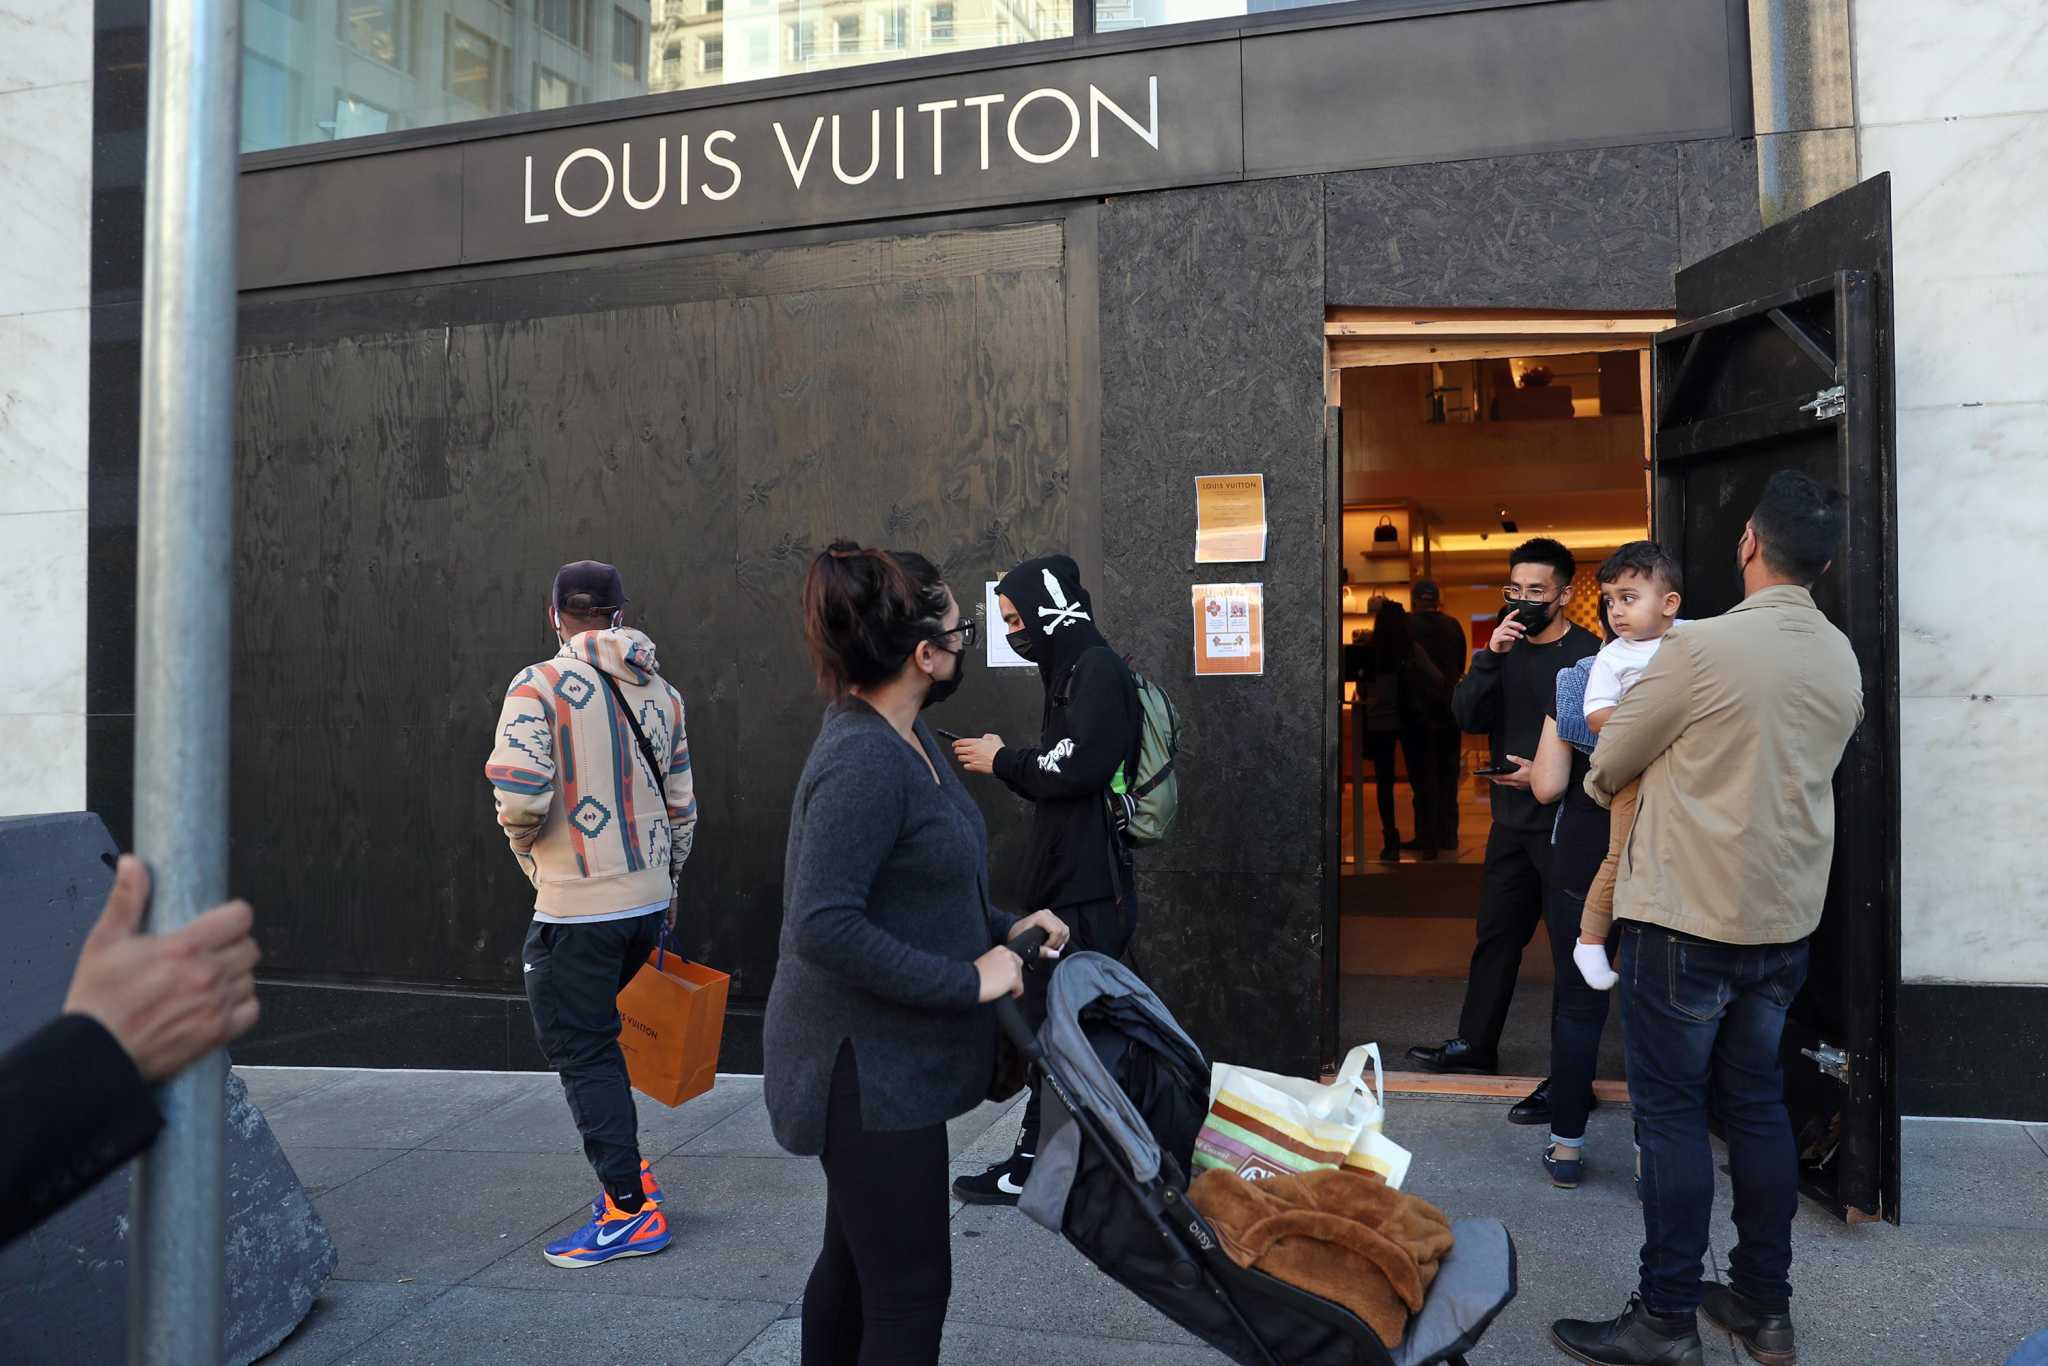 Louis Vuitton shoplifting could be charged as felony robbery - Los Angeles  Times